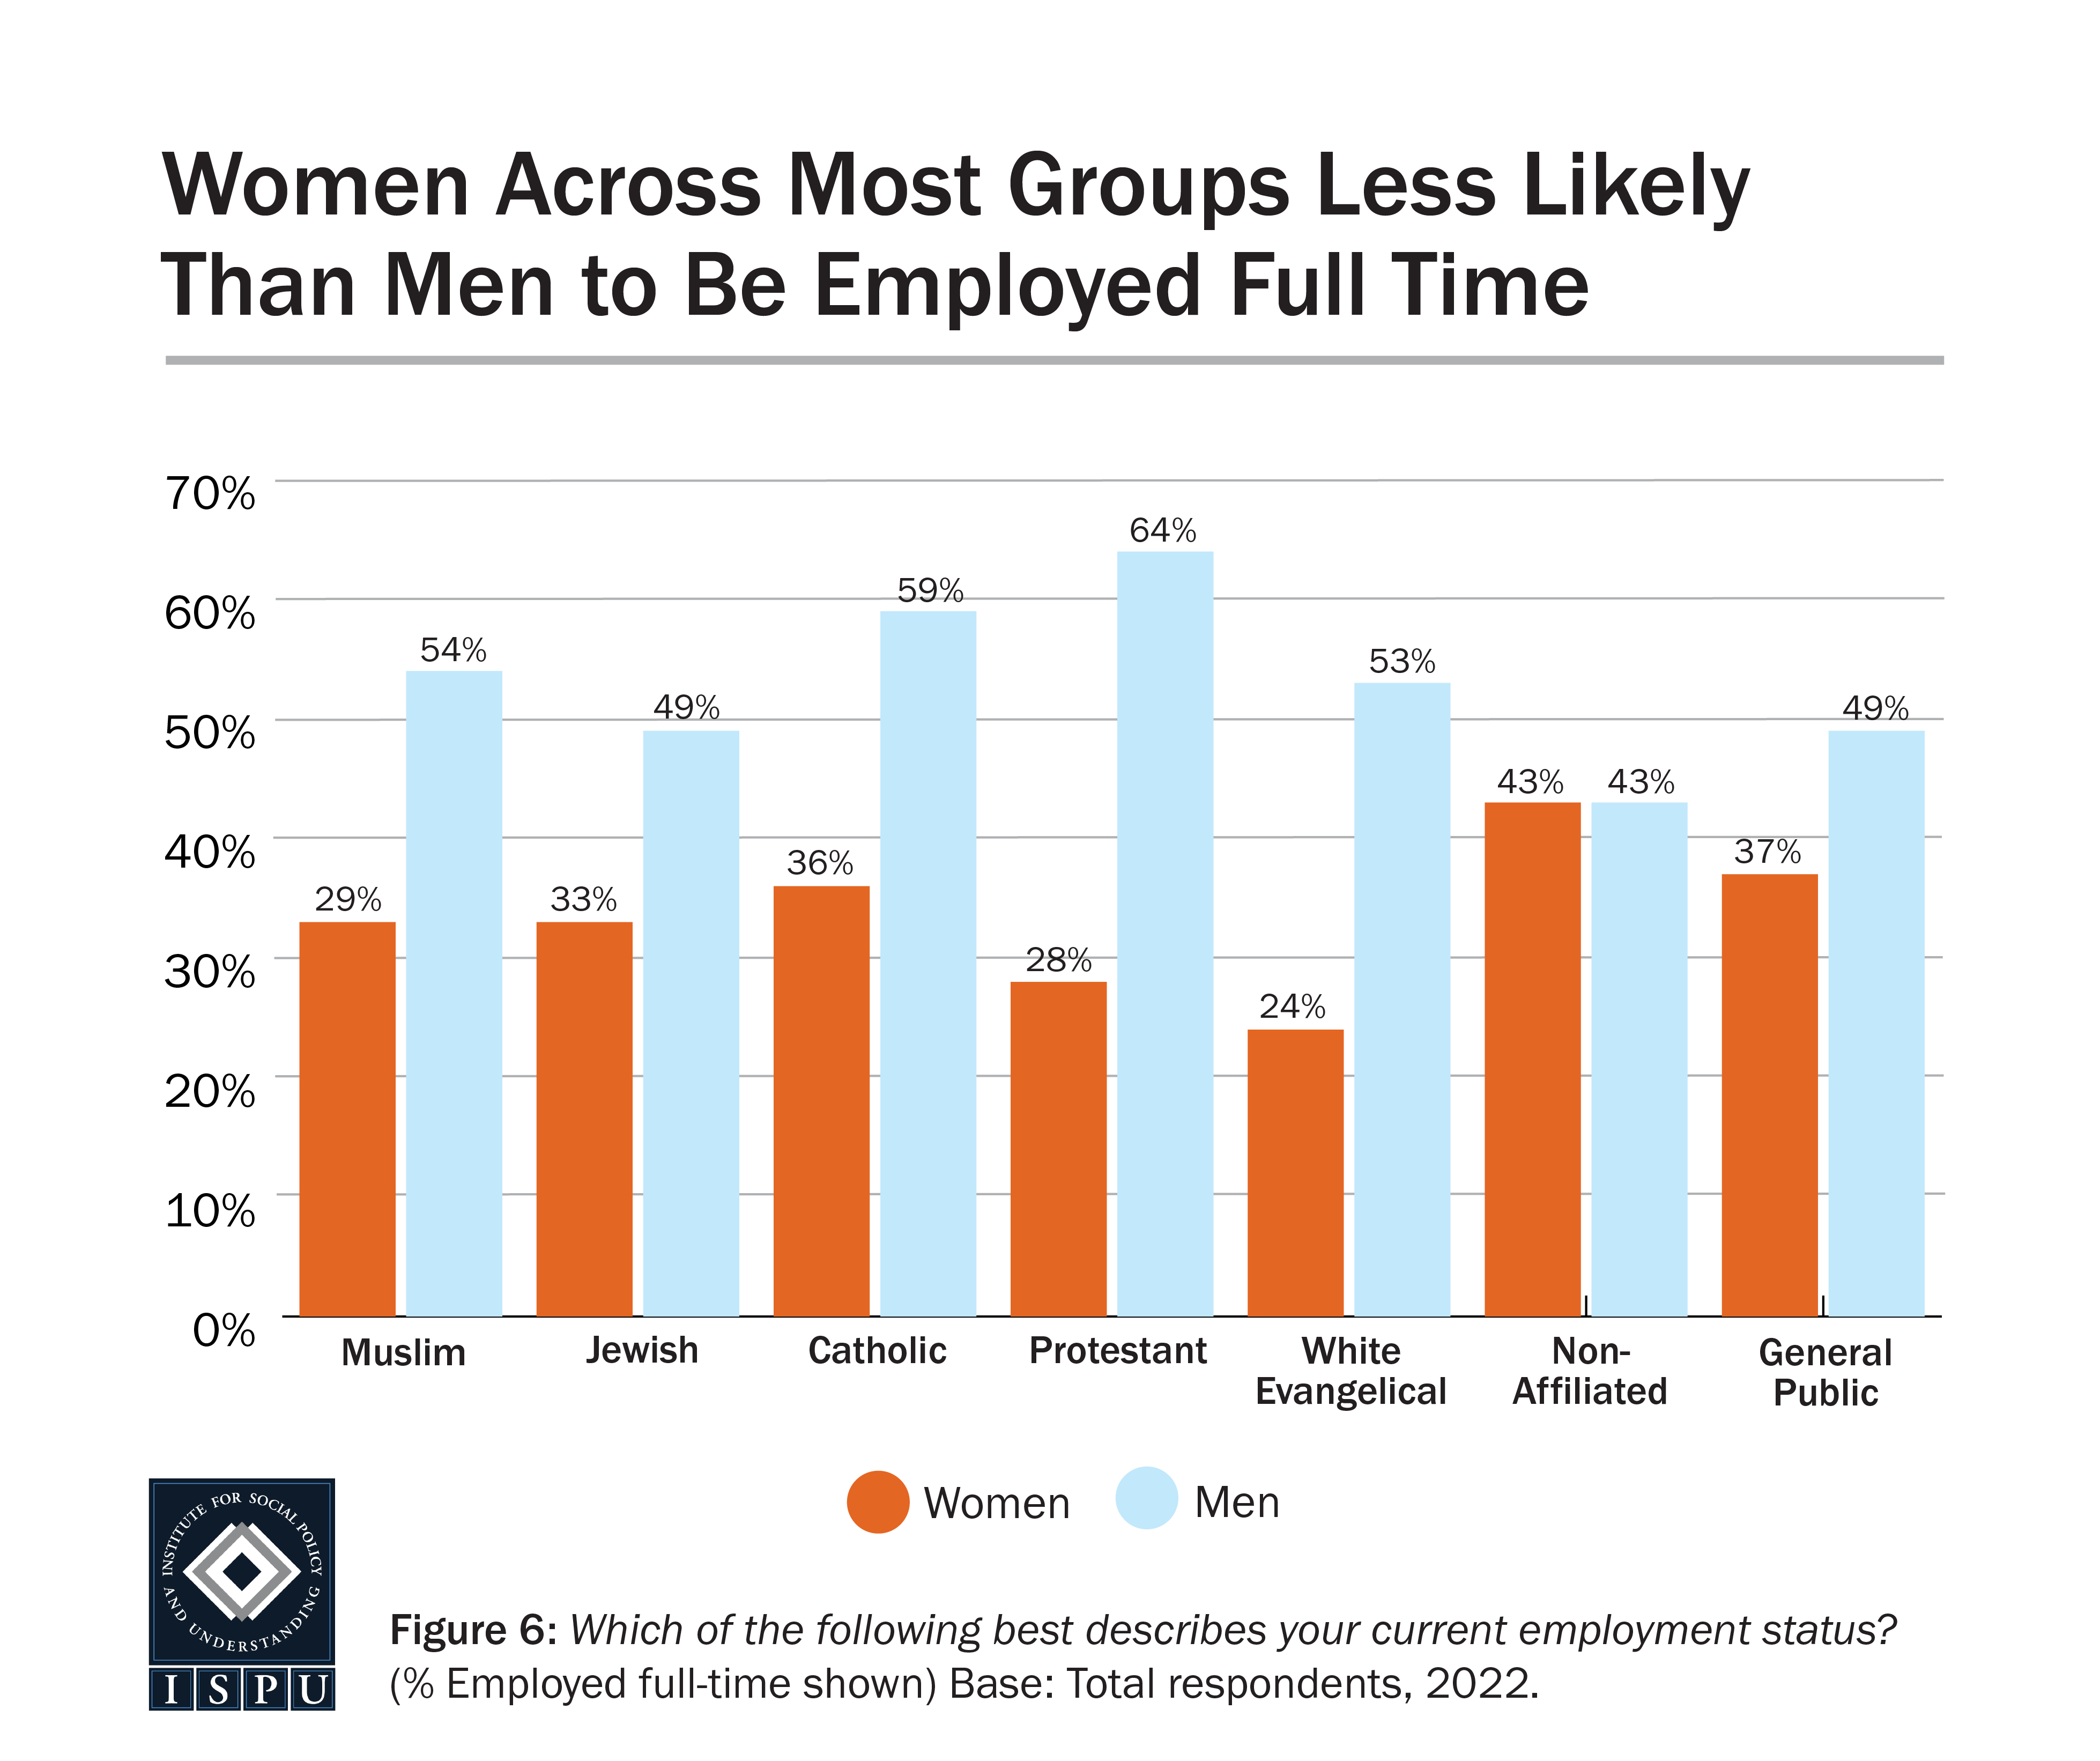 A bar graph showing that women across most groups are less likely than men to be employed full time